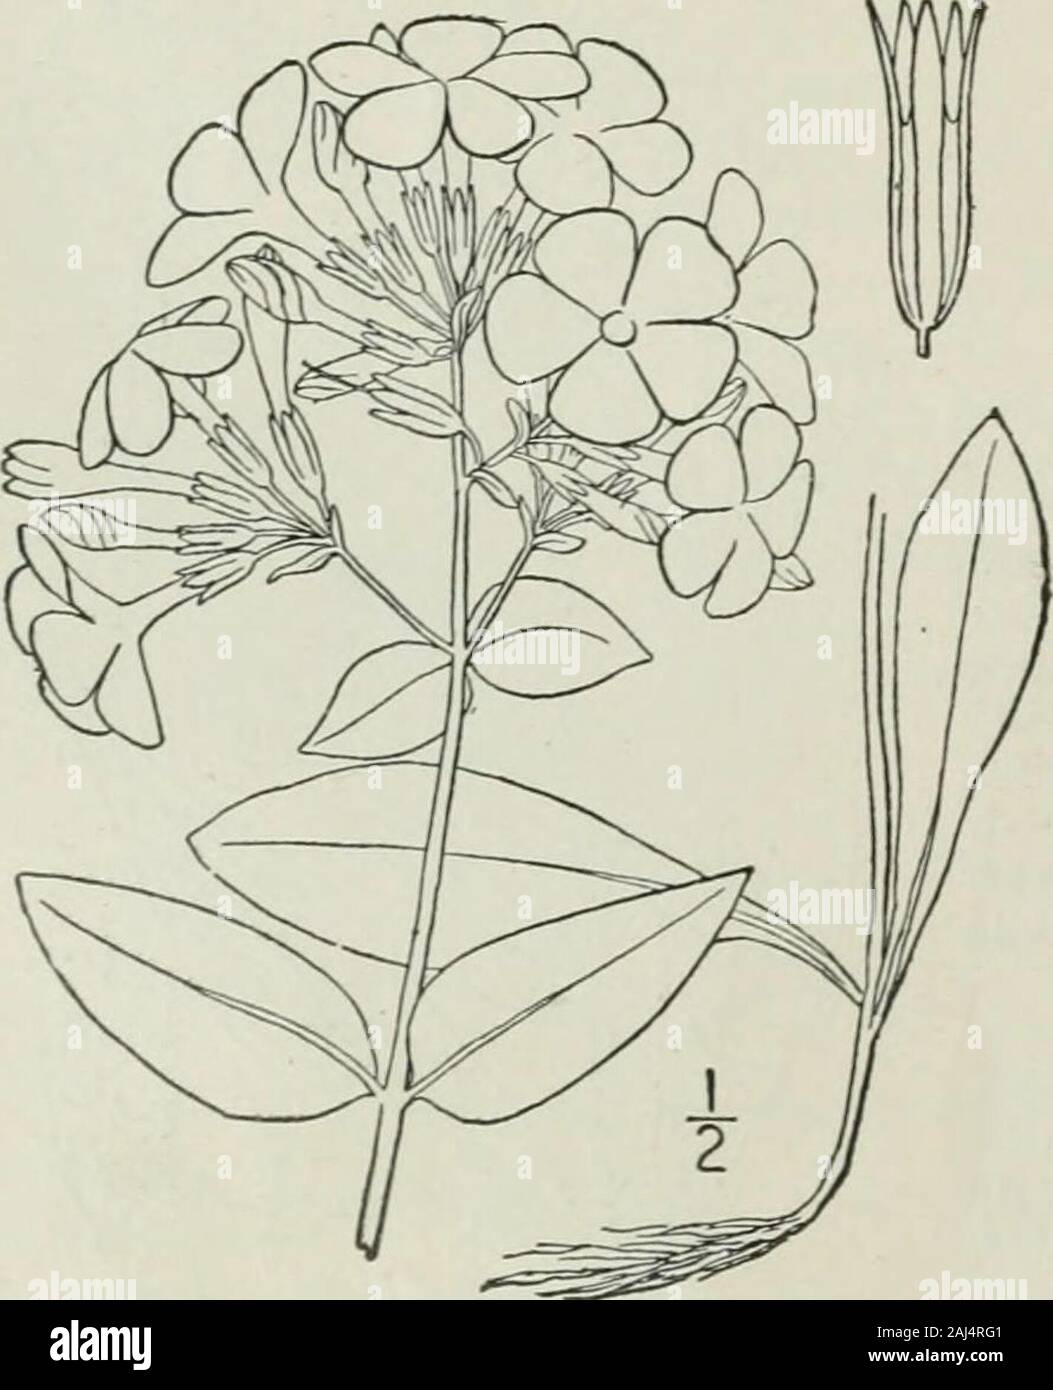 An illustrated flora of the northern United States, Canada and the British possessions : from Newfoundland to the parallel of the southern boundary of Virginia and from the Atlantic Ocean westward to the 102nd meridian . 4. Phlox ovata L. ^Mountain Phlox.Fig. 3457. Phlox ovata L, Sp. PL 152. i753- Phlox Carolina L. Sp. PI. Ed. 2, 216. 1762. Glabrous or nearly so throughout; stems sim-ple, slender, ascending from a decumbent base,i°-2° high. Leaves rather firm, the upper ovateor ovate-lanceolate, sessile by a rounded or sub-cordate base, acute at the apex, 1-2 long, thelower and basal ones long Stock Photo